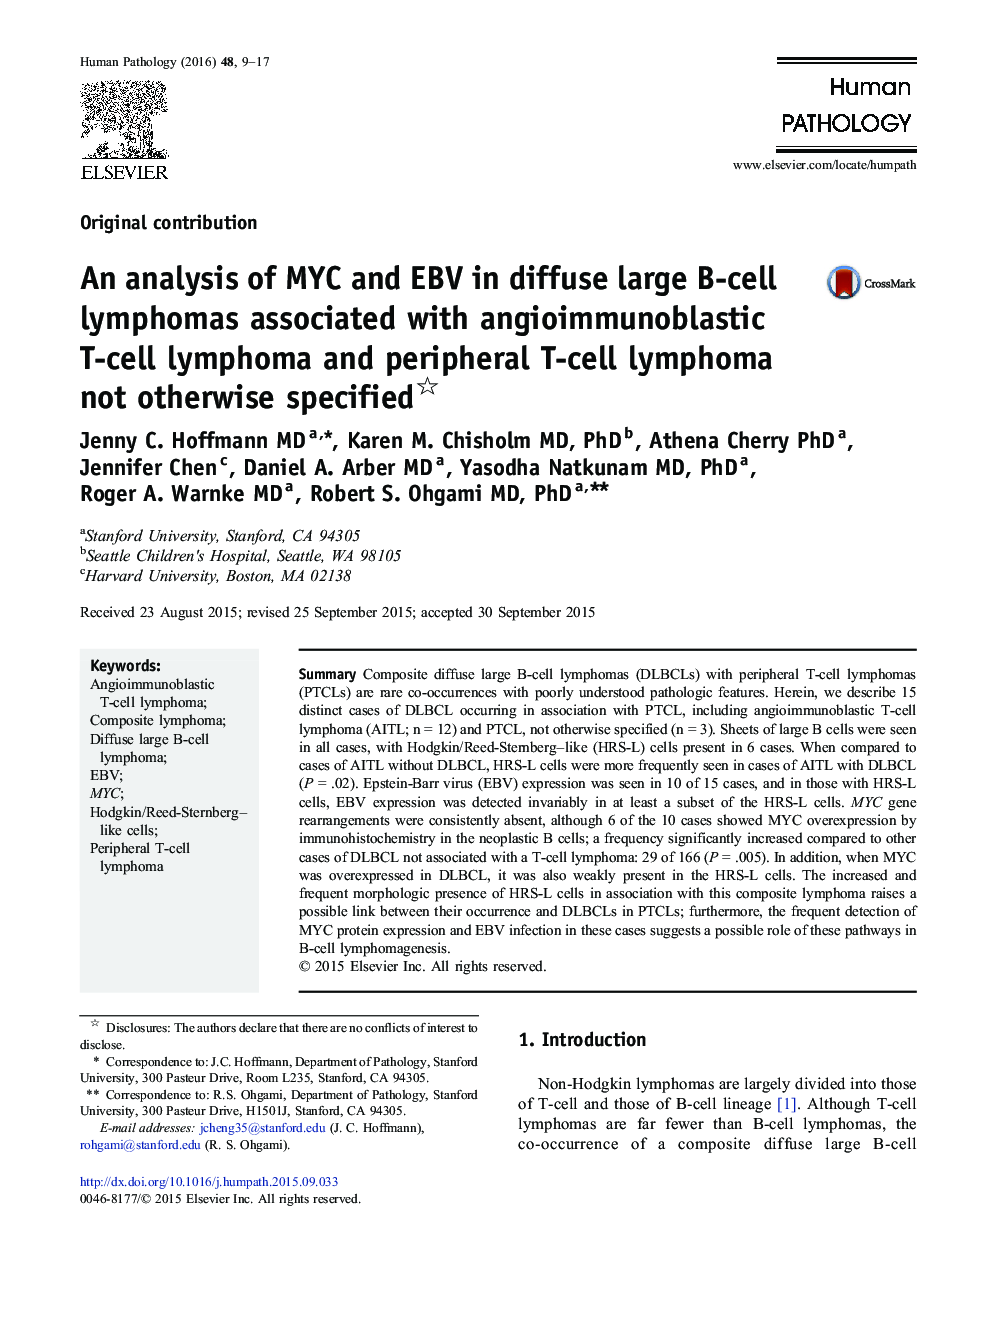 An analysis of MYC and EBV in diffuse large B-cell lymphomas associated with angioimmunoblastic T-cell lymphoma and peripheral T-cell lymphoma not otherwise specified 